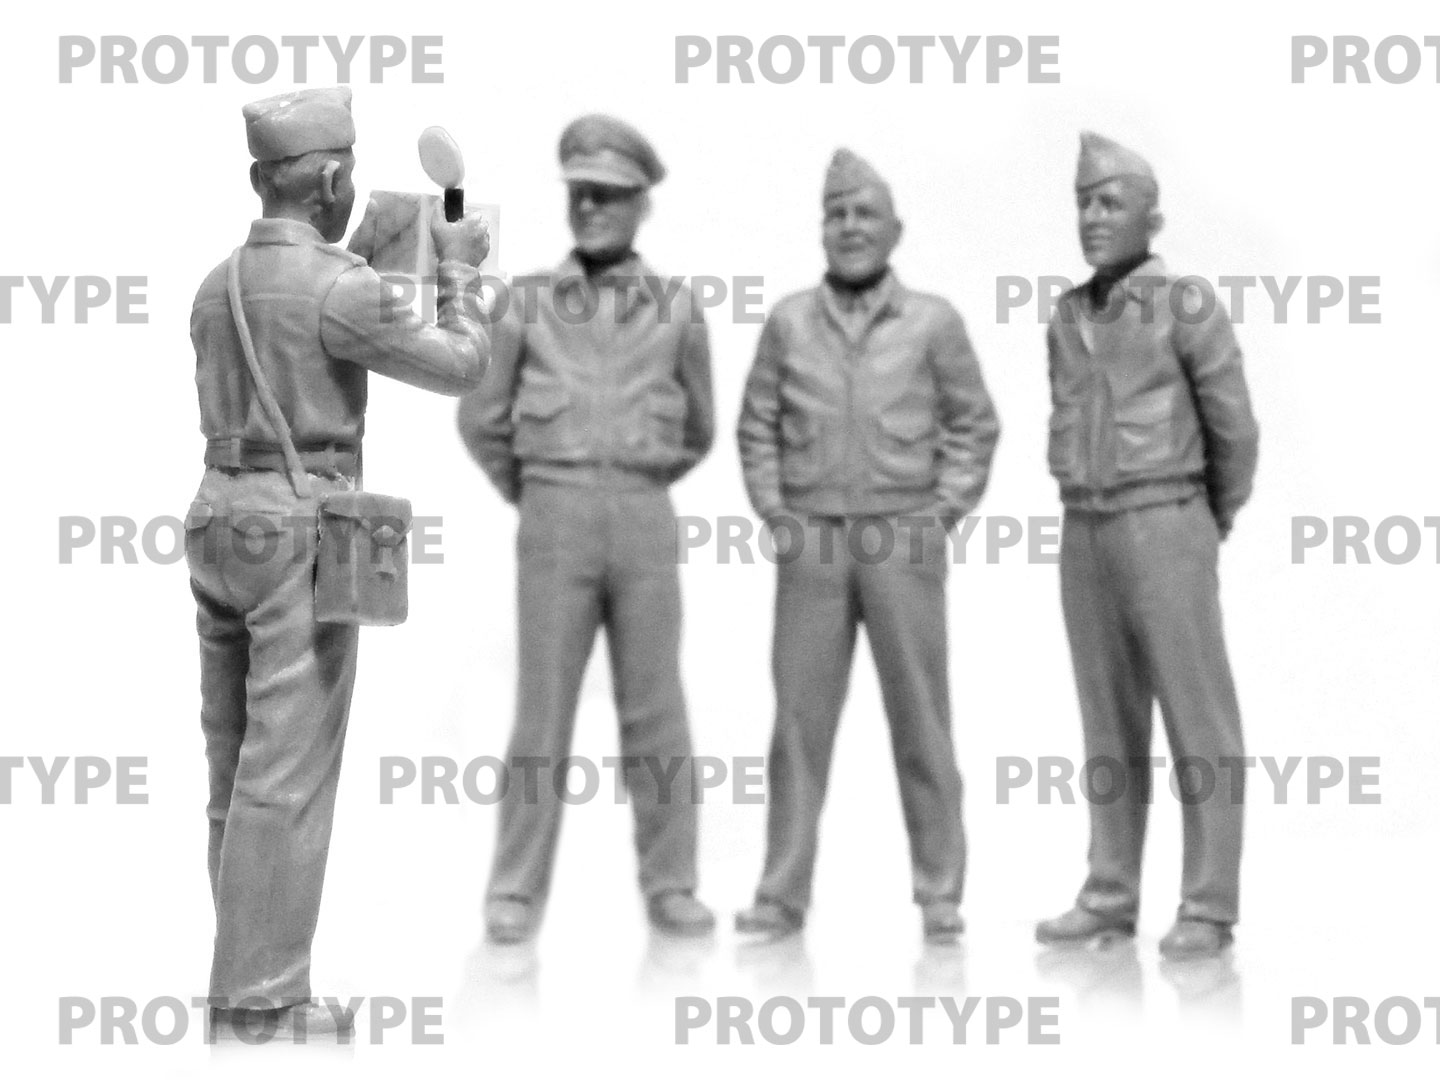 1944-1945 Photo to remember 1/32 ICM 32116 USAAF Pilots